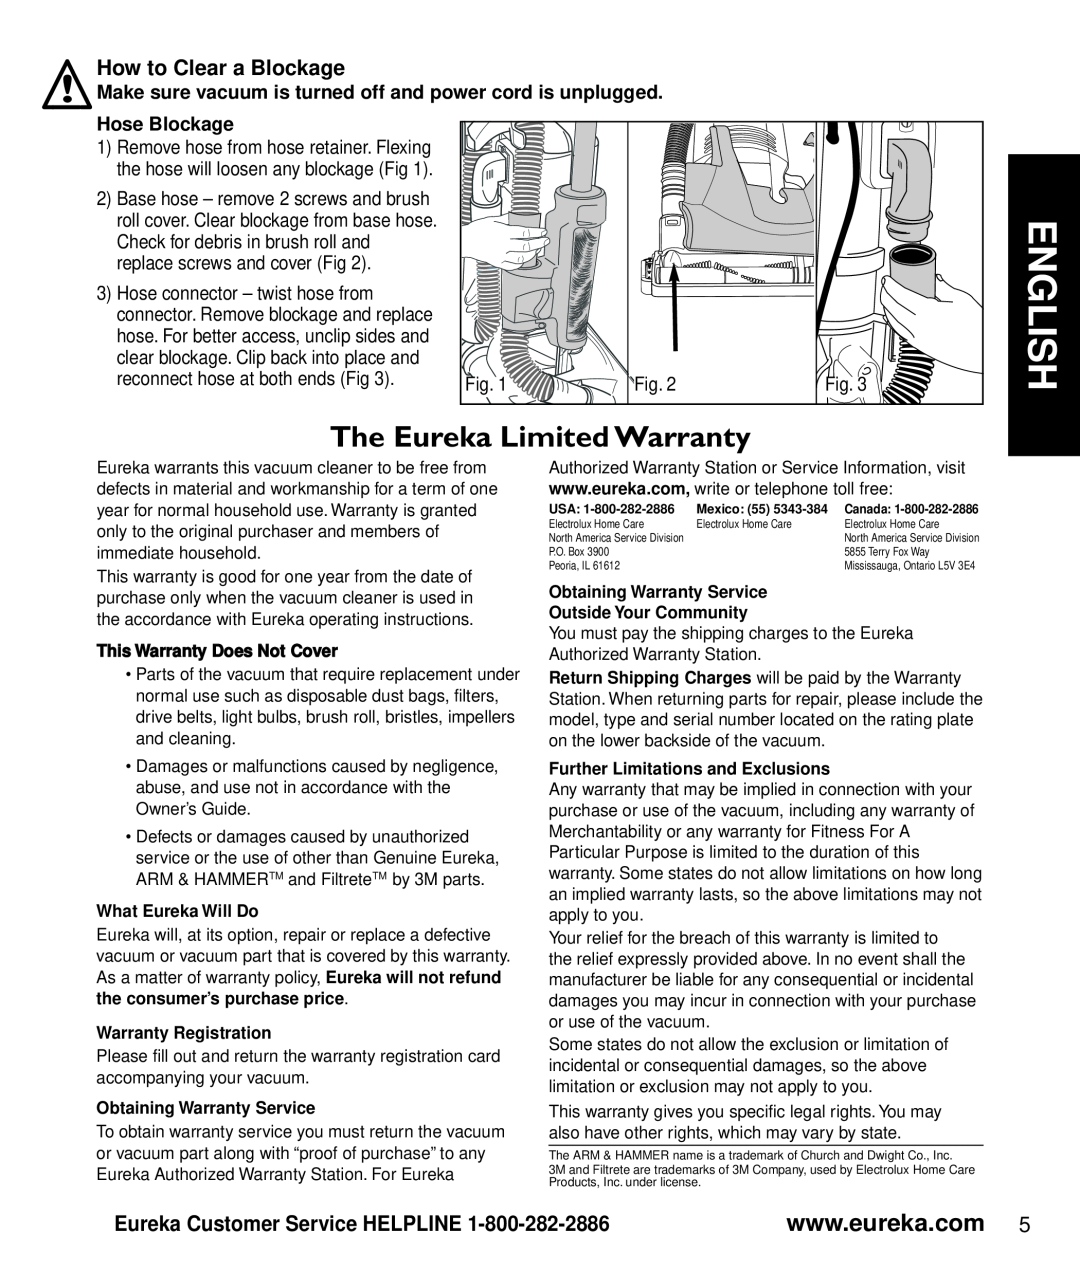 Eureka 2997-2999 Series How to Clear a Blockage, Hose Blockage, English, The Eureka Limited Warranty, What Eureka Will Do 